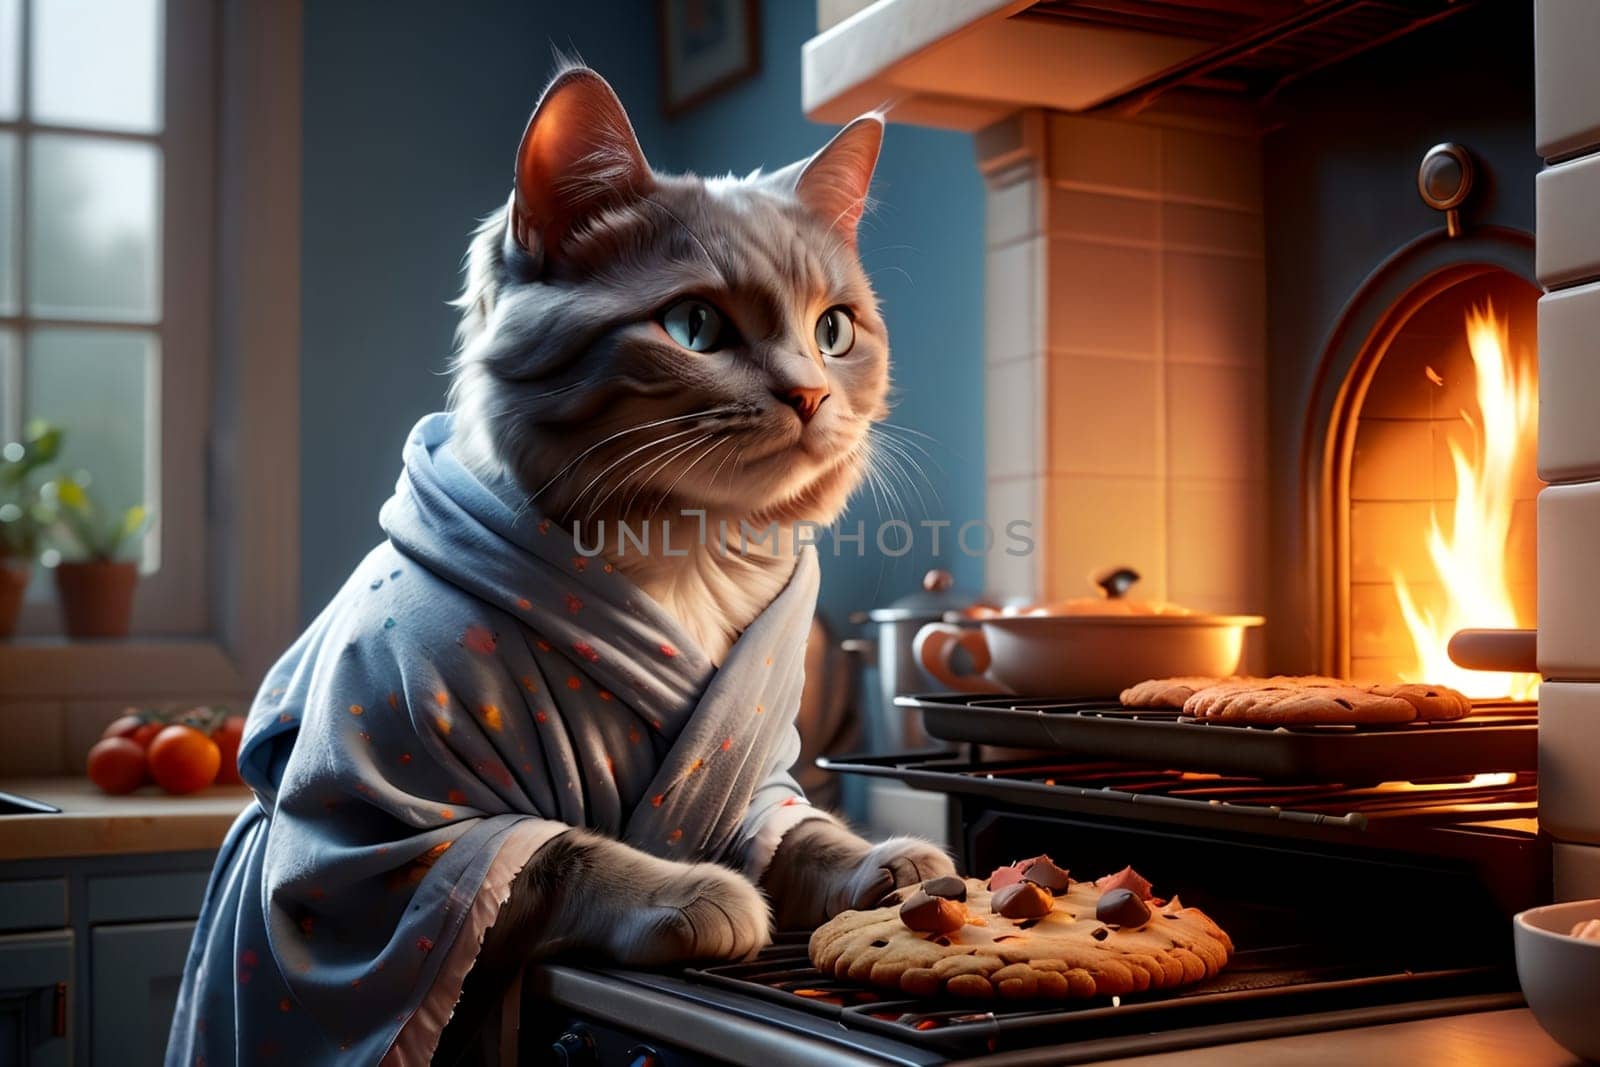 cat in a bathrobe bakes cookies in the kitchen .